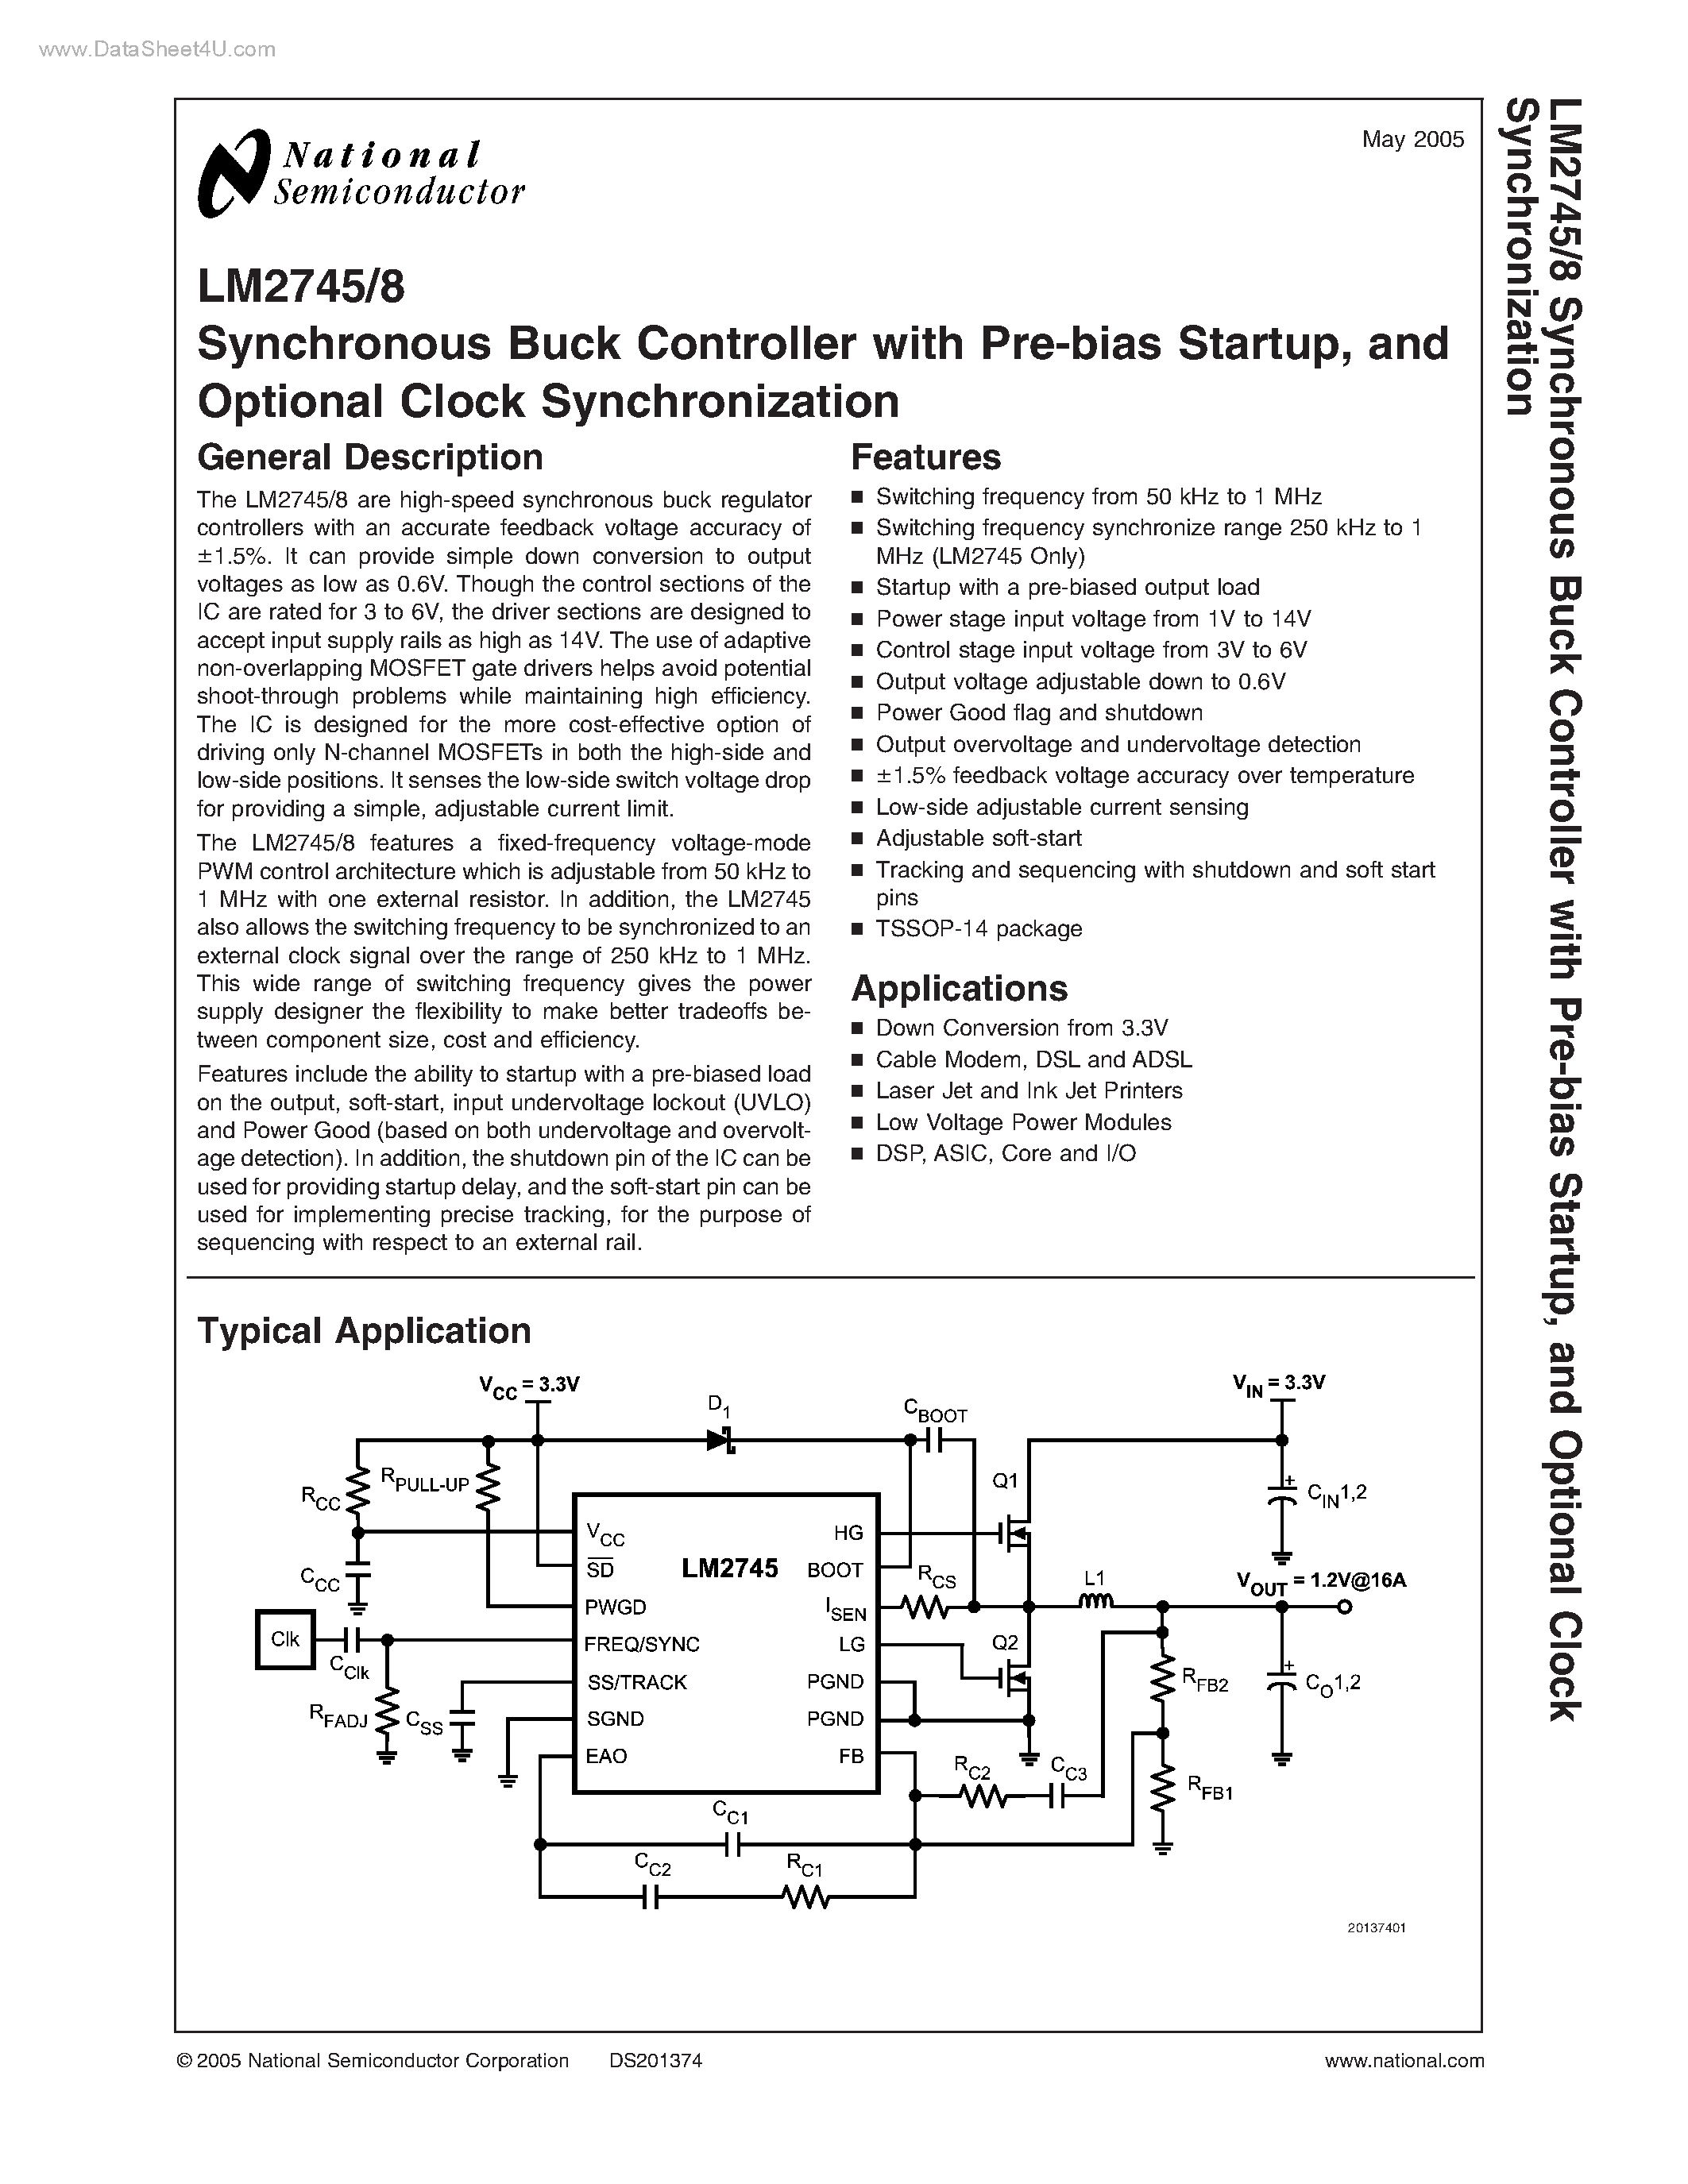 Datasheet LM2745 - (LM2745 / LM2748) Synchronous Buck Controller page 1